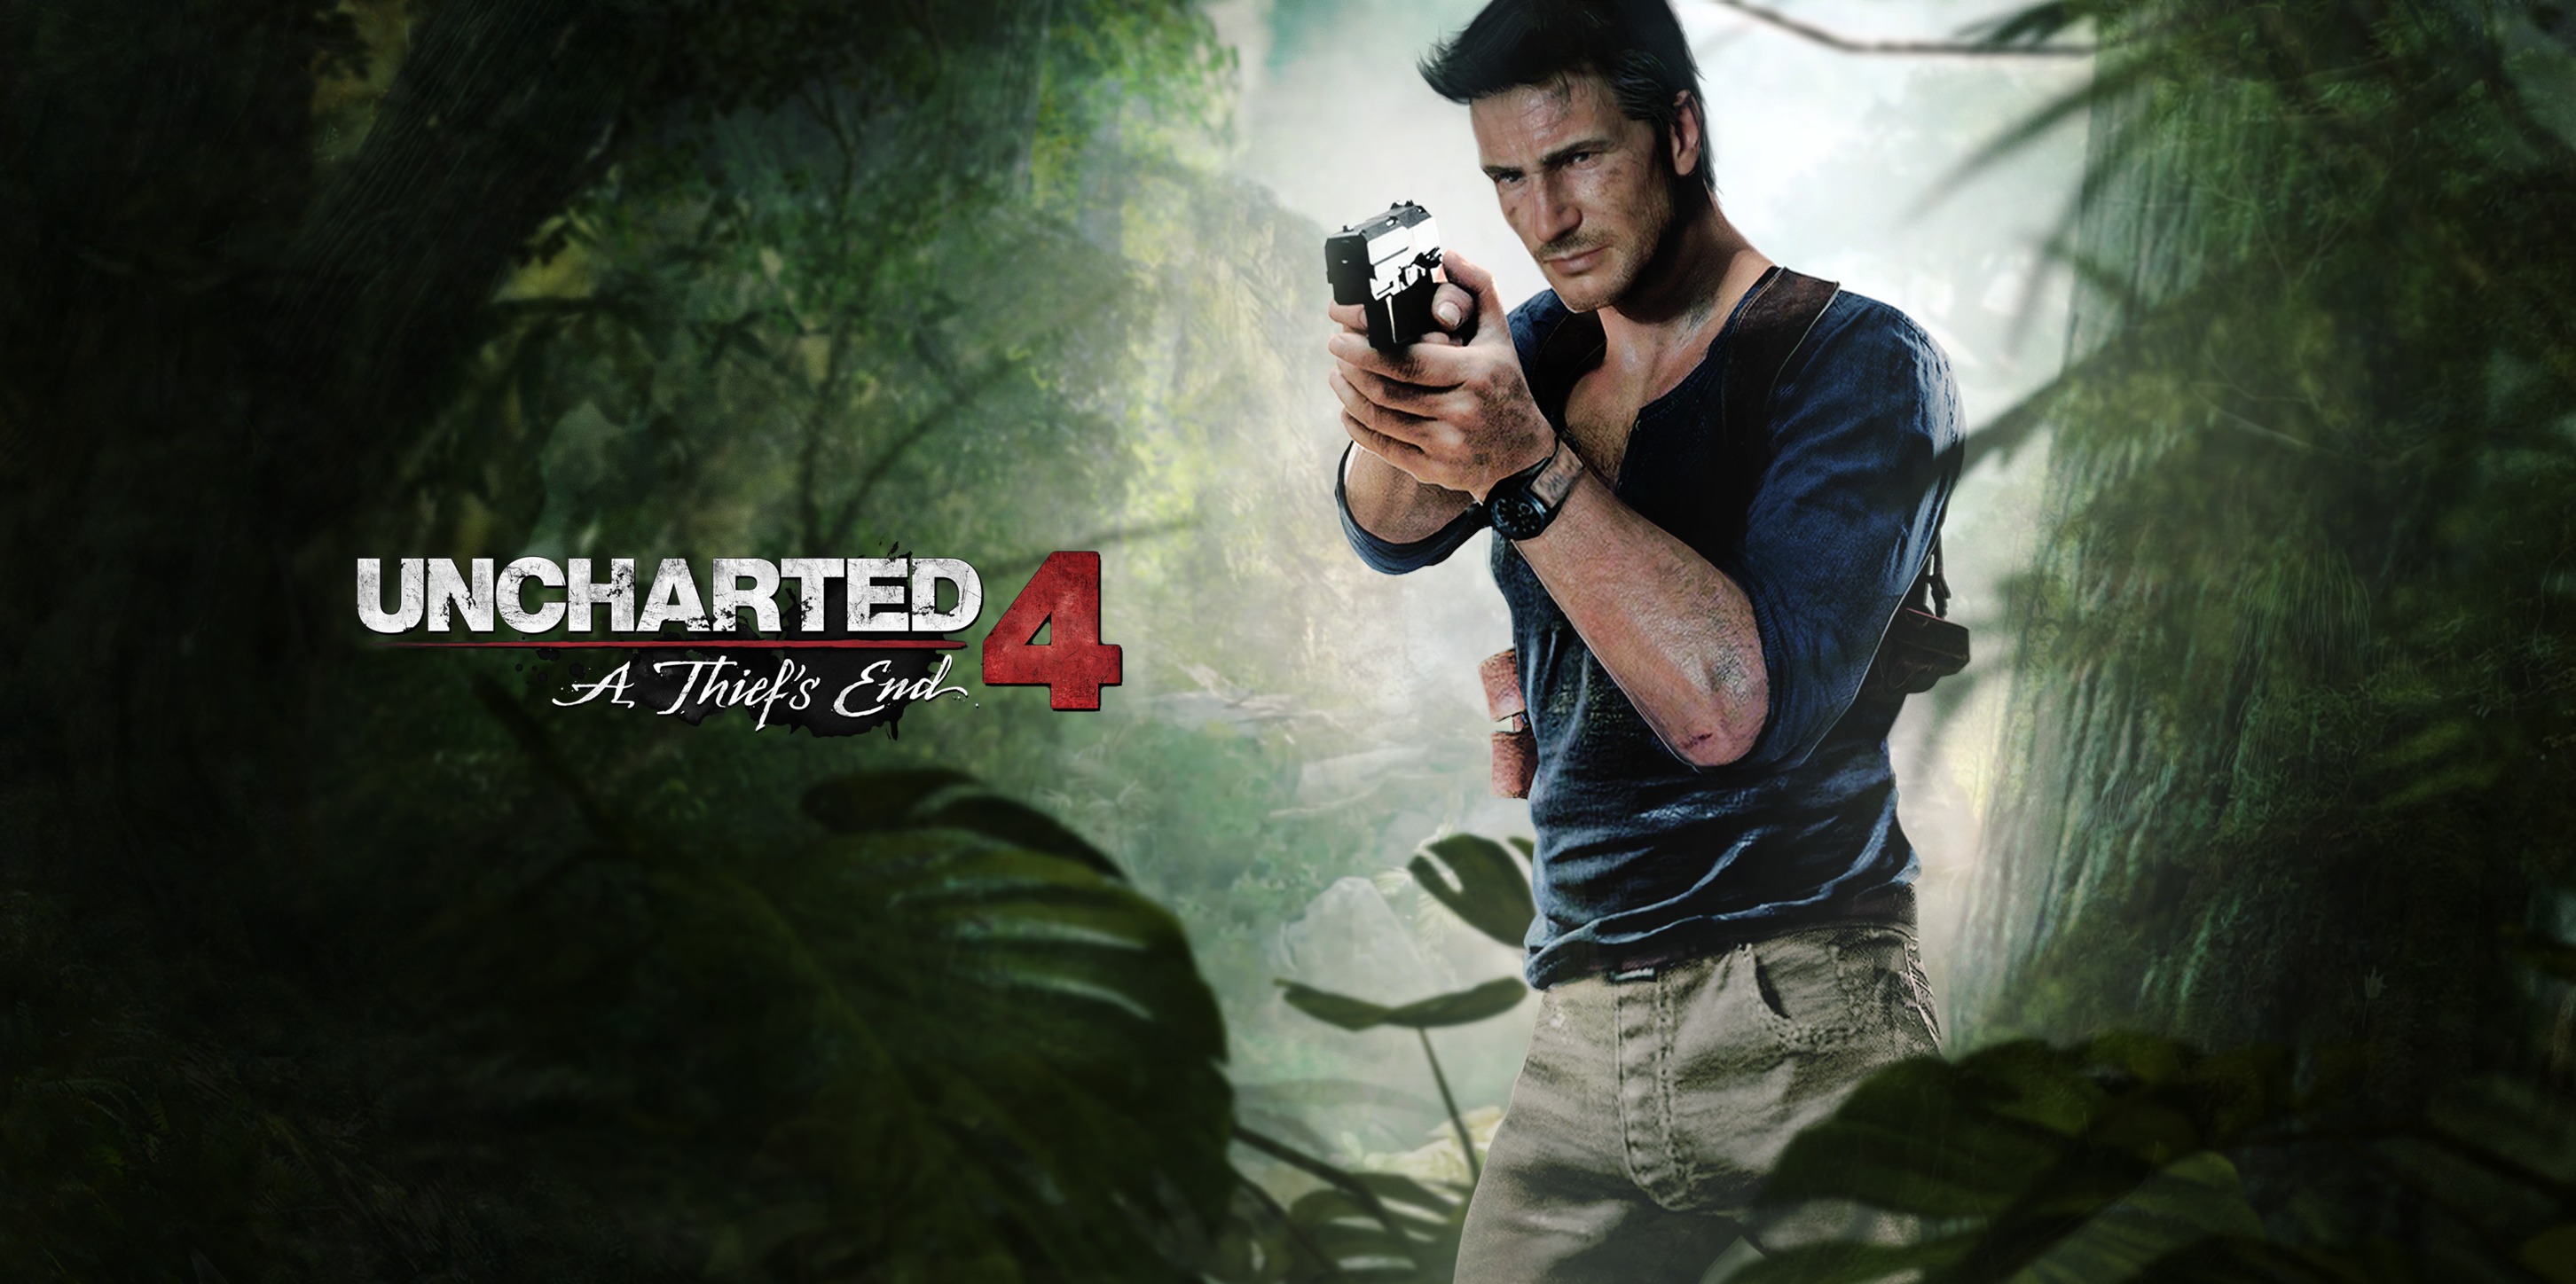 uncharted 4: a thief's end, nathan drake, video game, uncharted